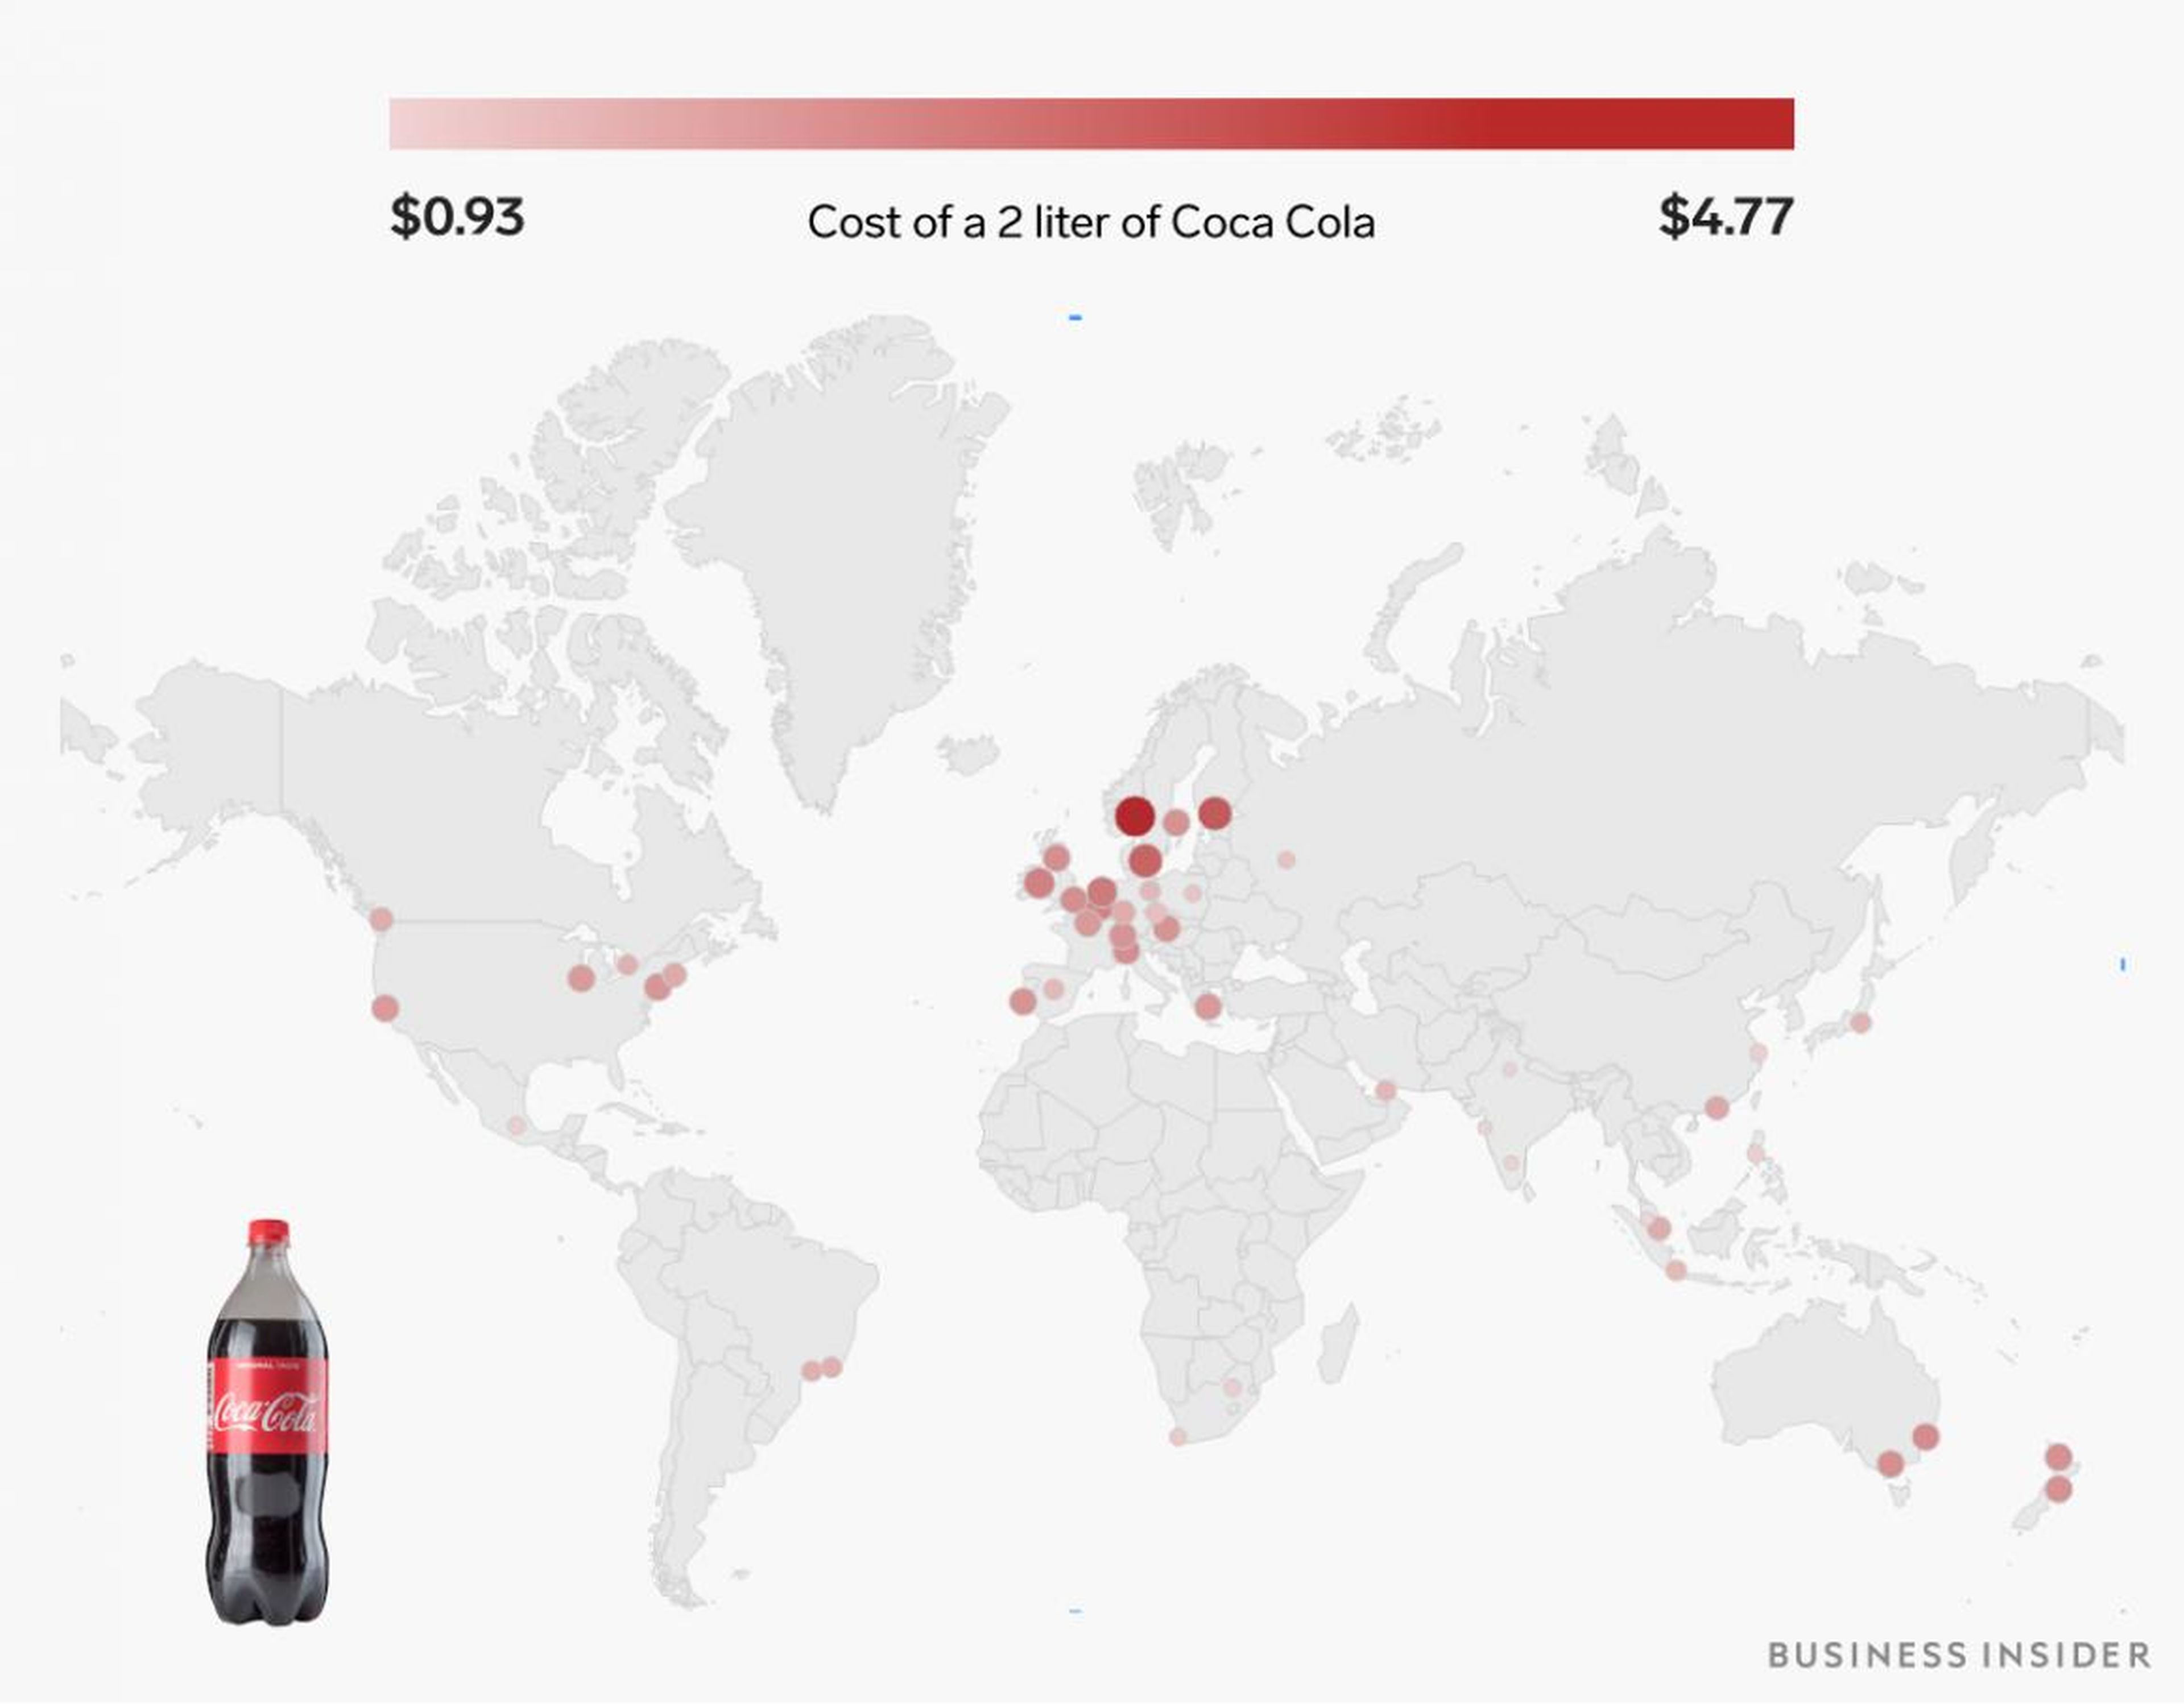 A 2-liter bottle of Coca-Cola ranges from under $1 to $5.